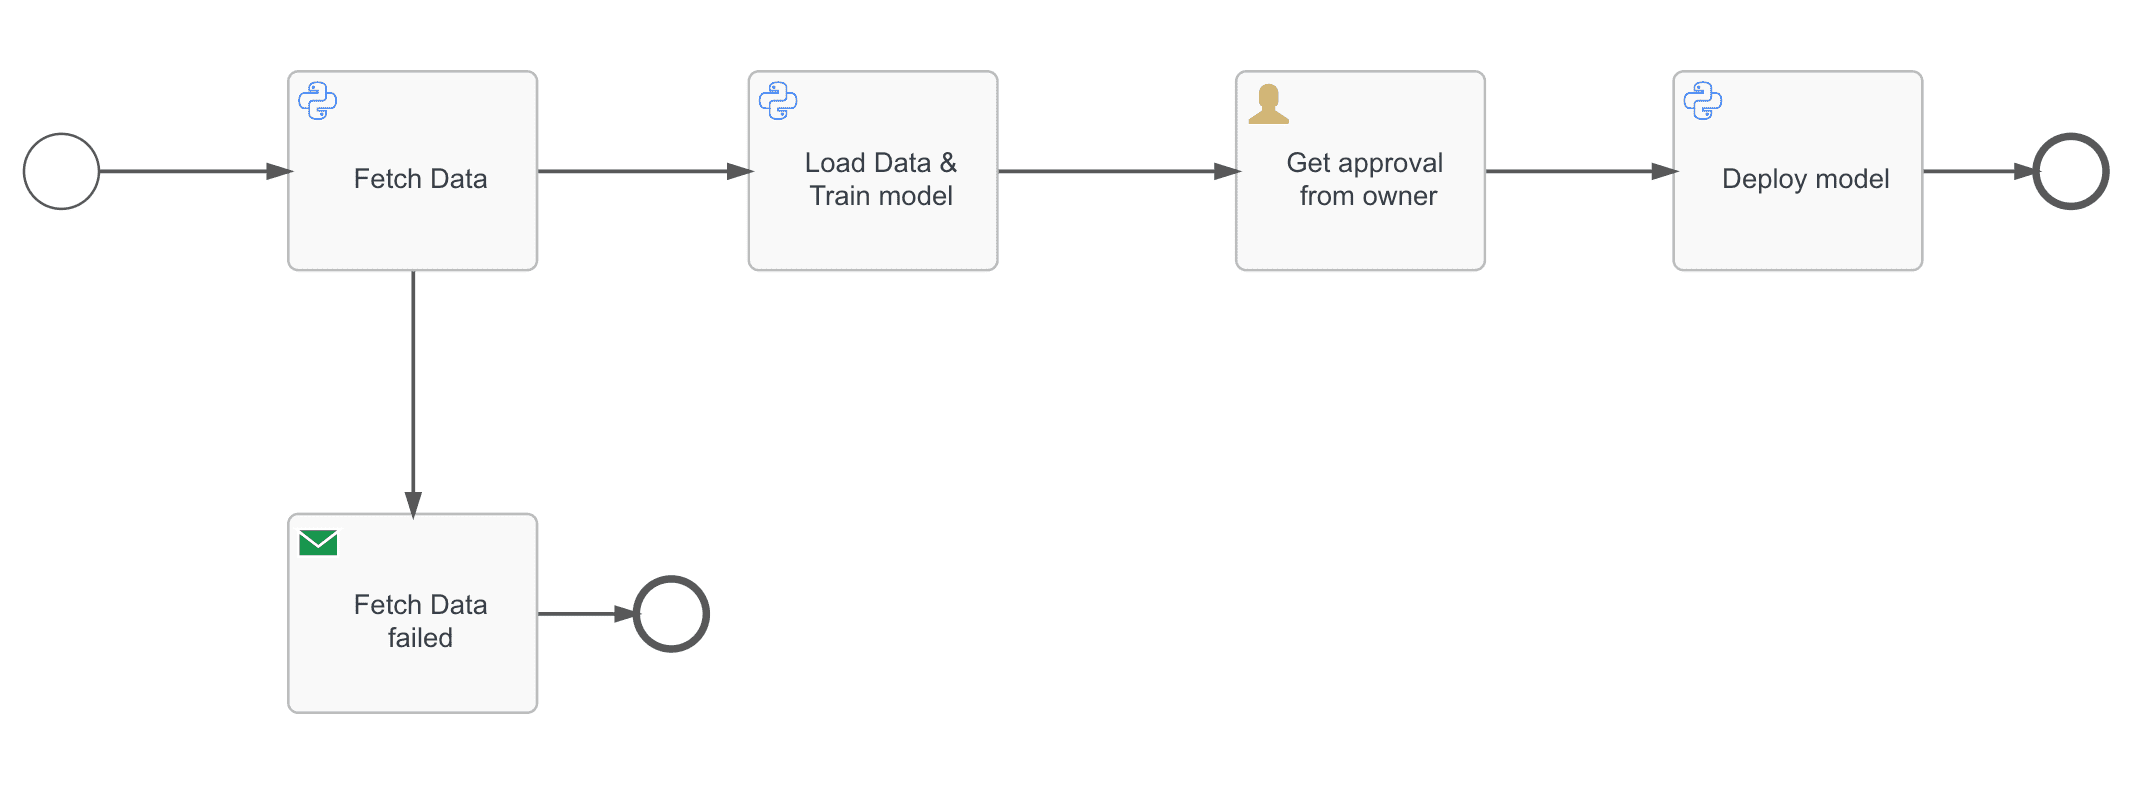 A BPMN pipeline containing tasks 'fetch data', 'load data & train model', 'approval from owner', 'deploy model' and 'email on failure to fetch data'. All script tasks are python